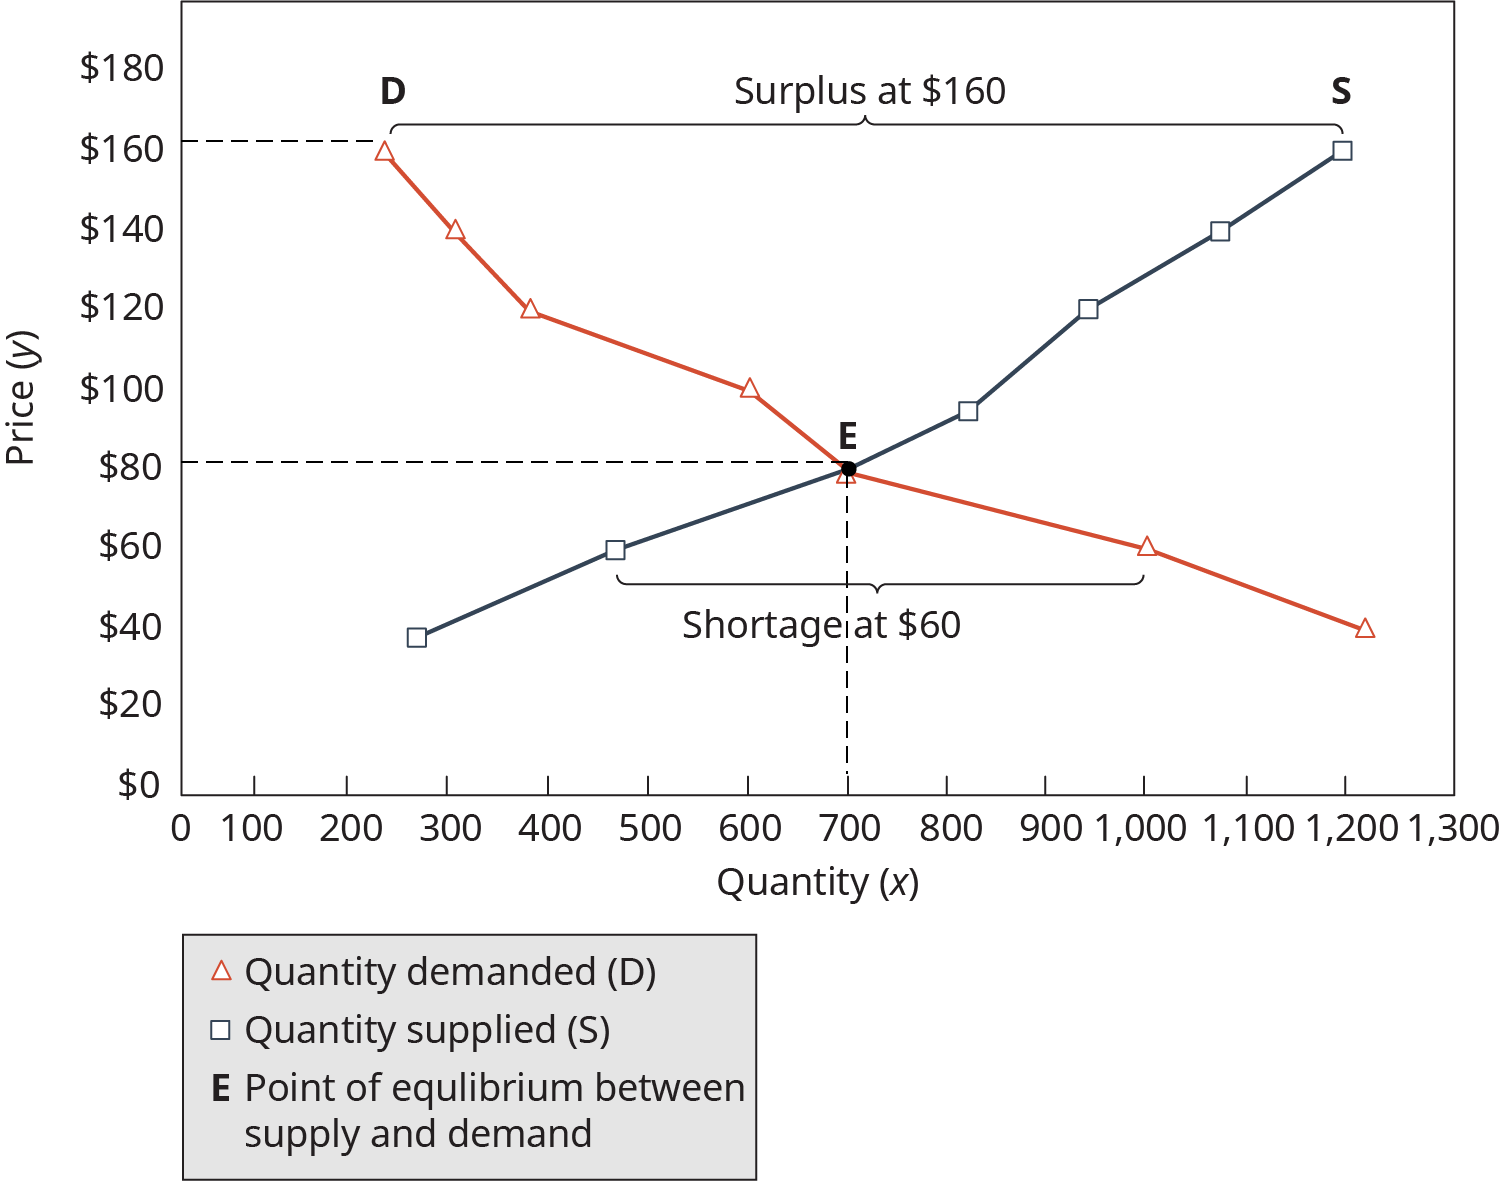 The x axis is labeled quantity, and the y axis is labeled price. The quantity demanded line, labeled D, falls from the upper left of the graph from approximate point 275, $160, to the bottom right of the graph at approximate point 1225, $45. The quantity supplied line, labeled S, rises from lower left to upper right, from approximate point 275, $40, to the upper right point 1200, $160. These lines intersect at a point labeled E, the point of equilibrium between supply and demand. Point E is at approximately 700, $80. Above point E, in between lines D and S, is labeled surplus at $160. Below point E, between lines D and S is labeled shortage at $60.